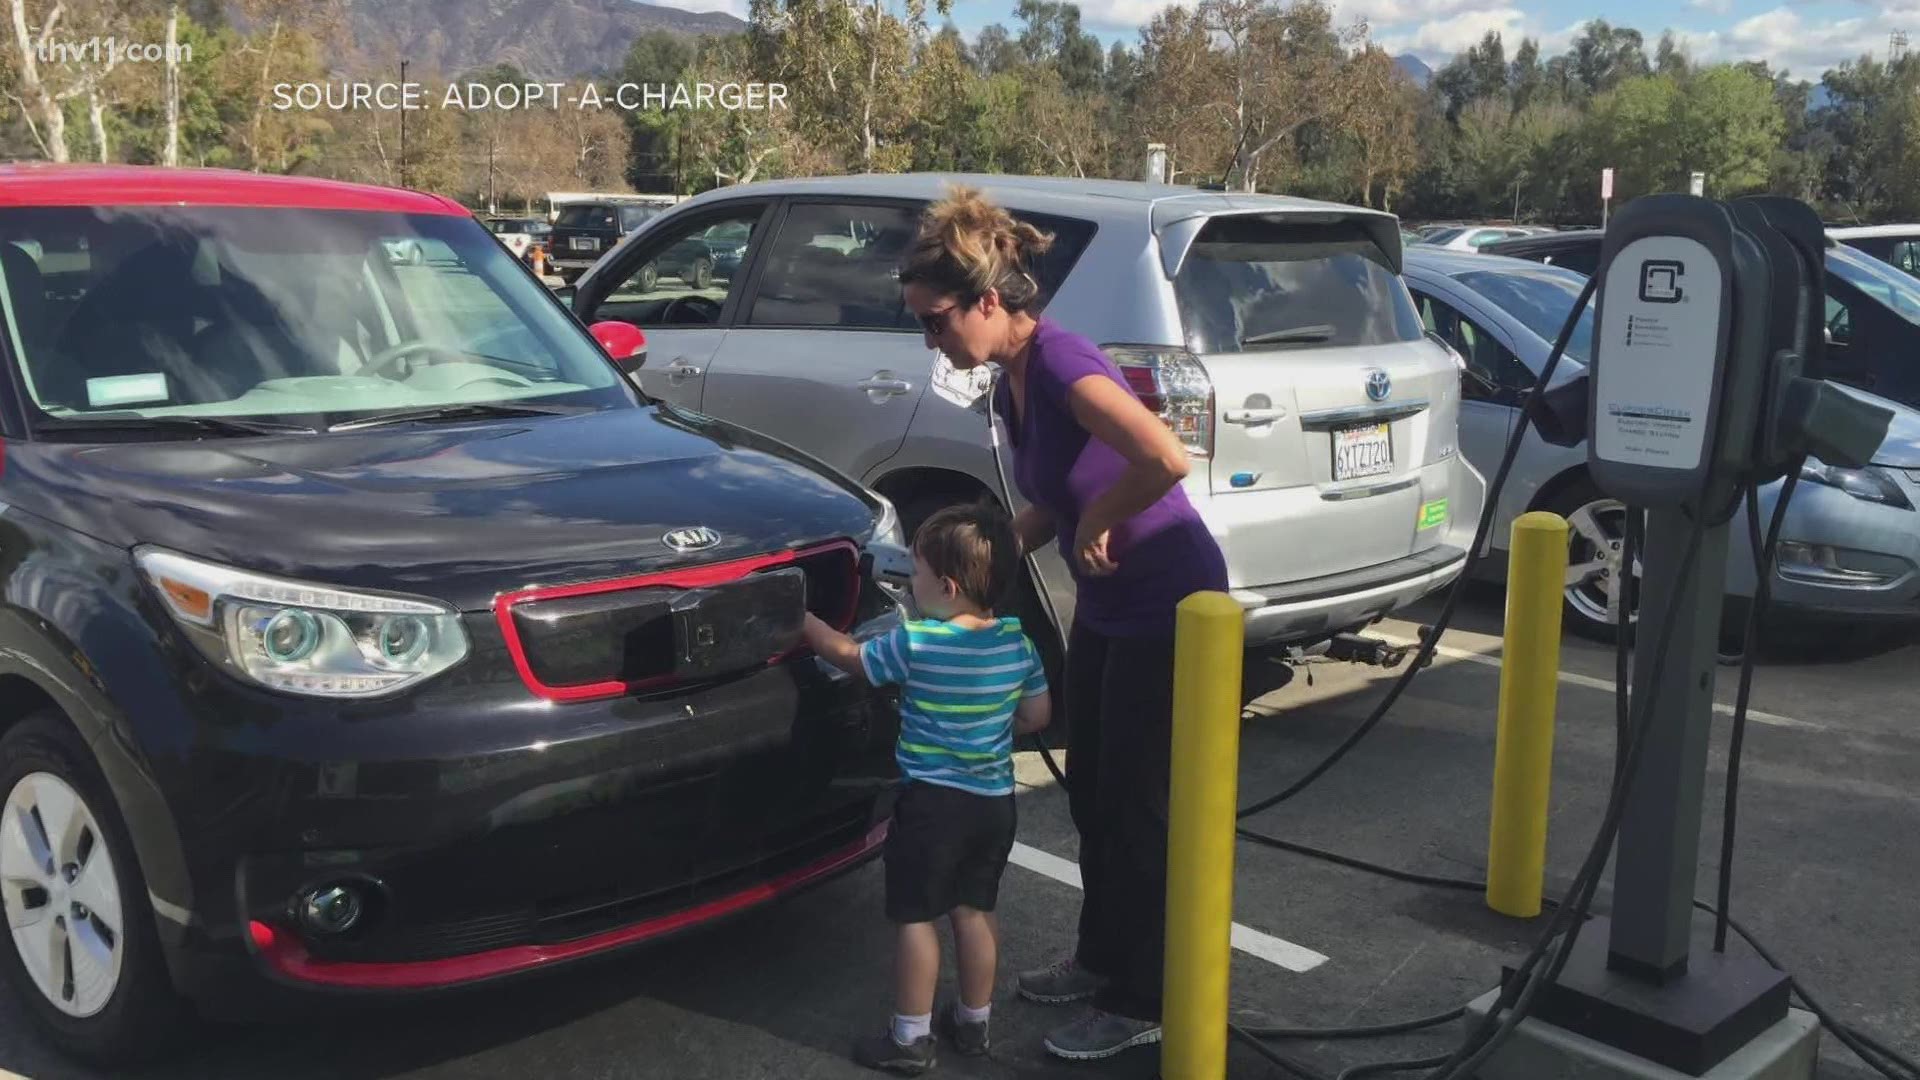 Lonoke Mayor said through a partnership with Entergy Arkansas and Adopt-A-Charger, Charge Up! Arkansas is helping Lonoke get an electric vehicle charging station.